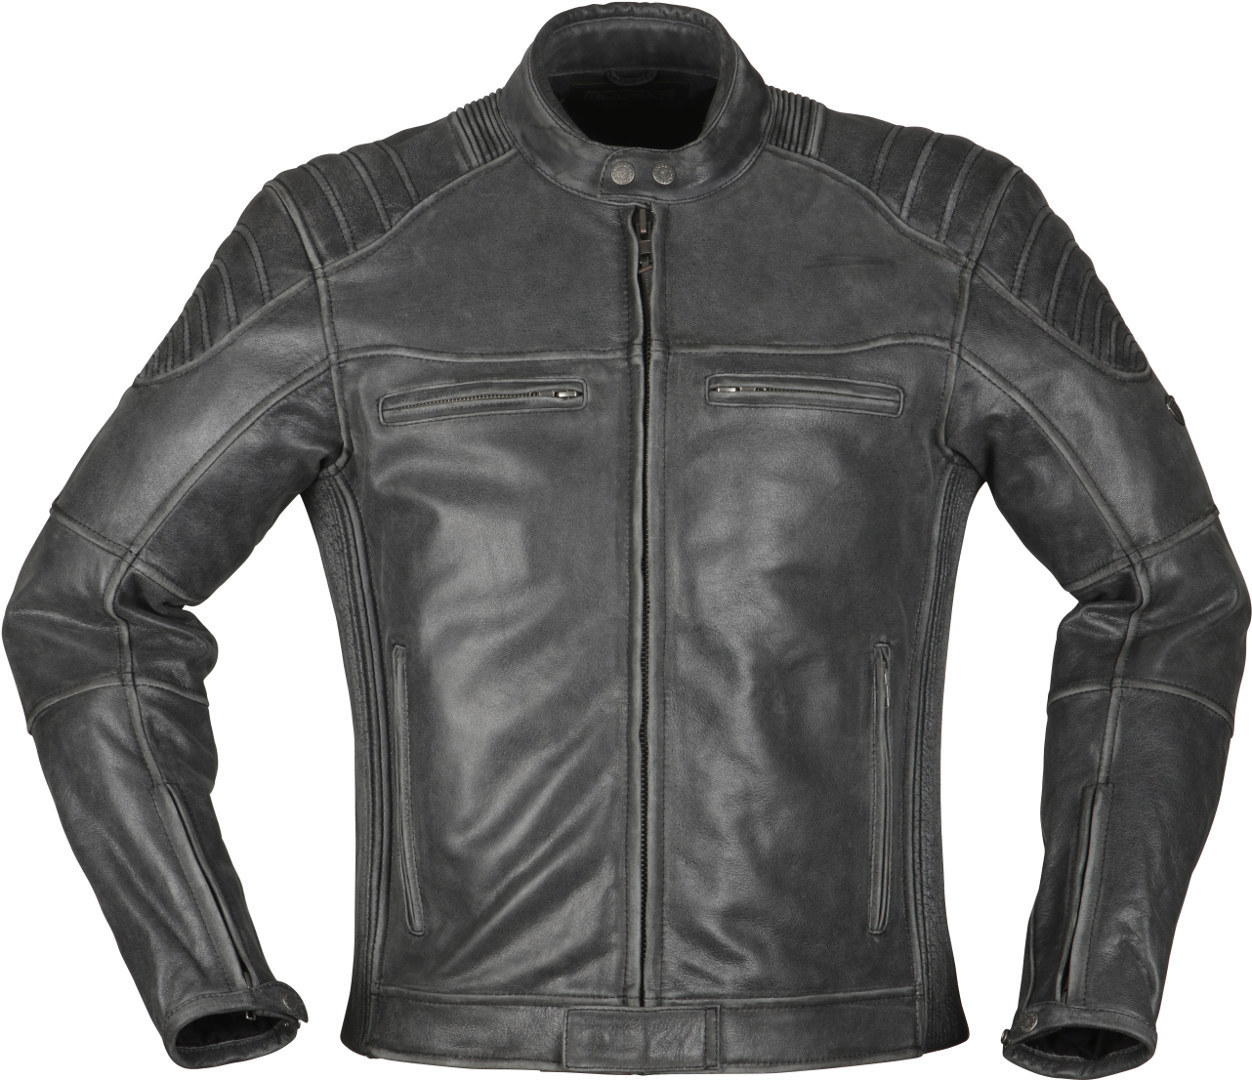 Image of Modeka Vincent Aged Motorcycle Leater Giacca, nero, dimensione 2XL